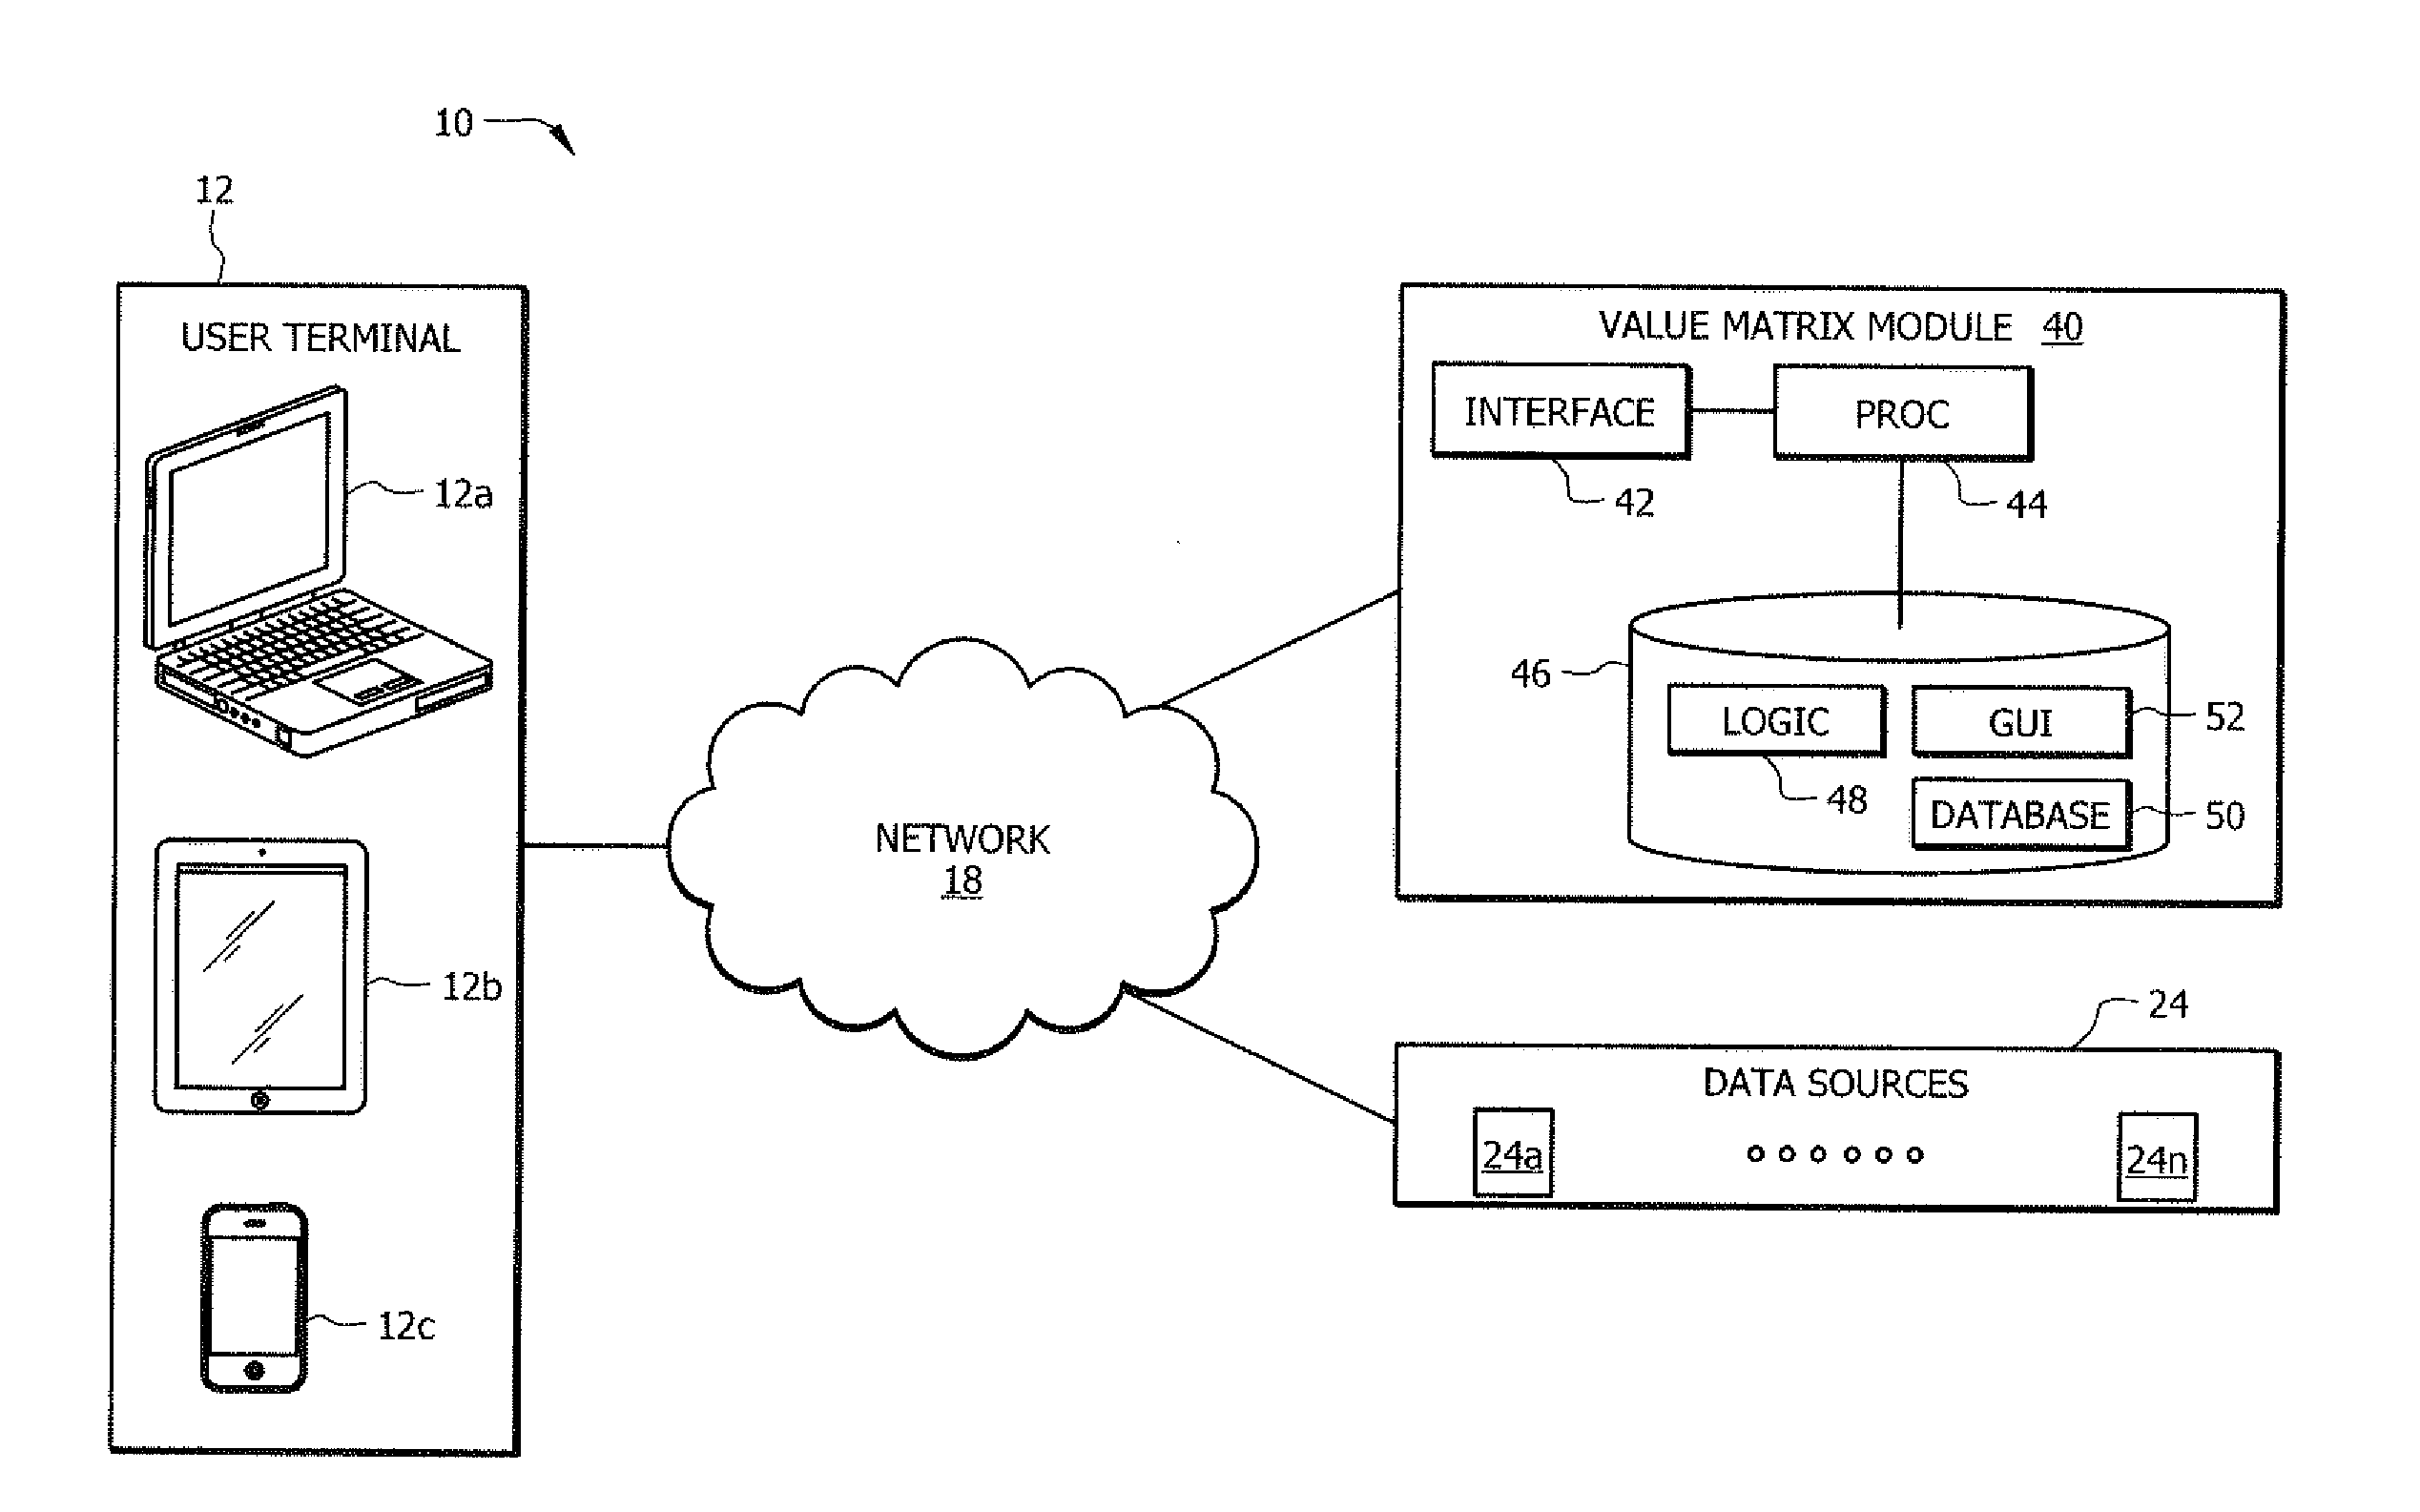 System and Method for Mapping Financial Data